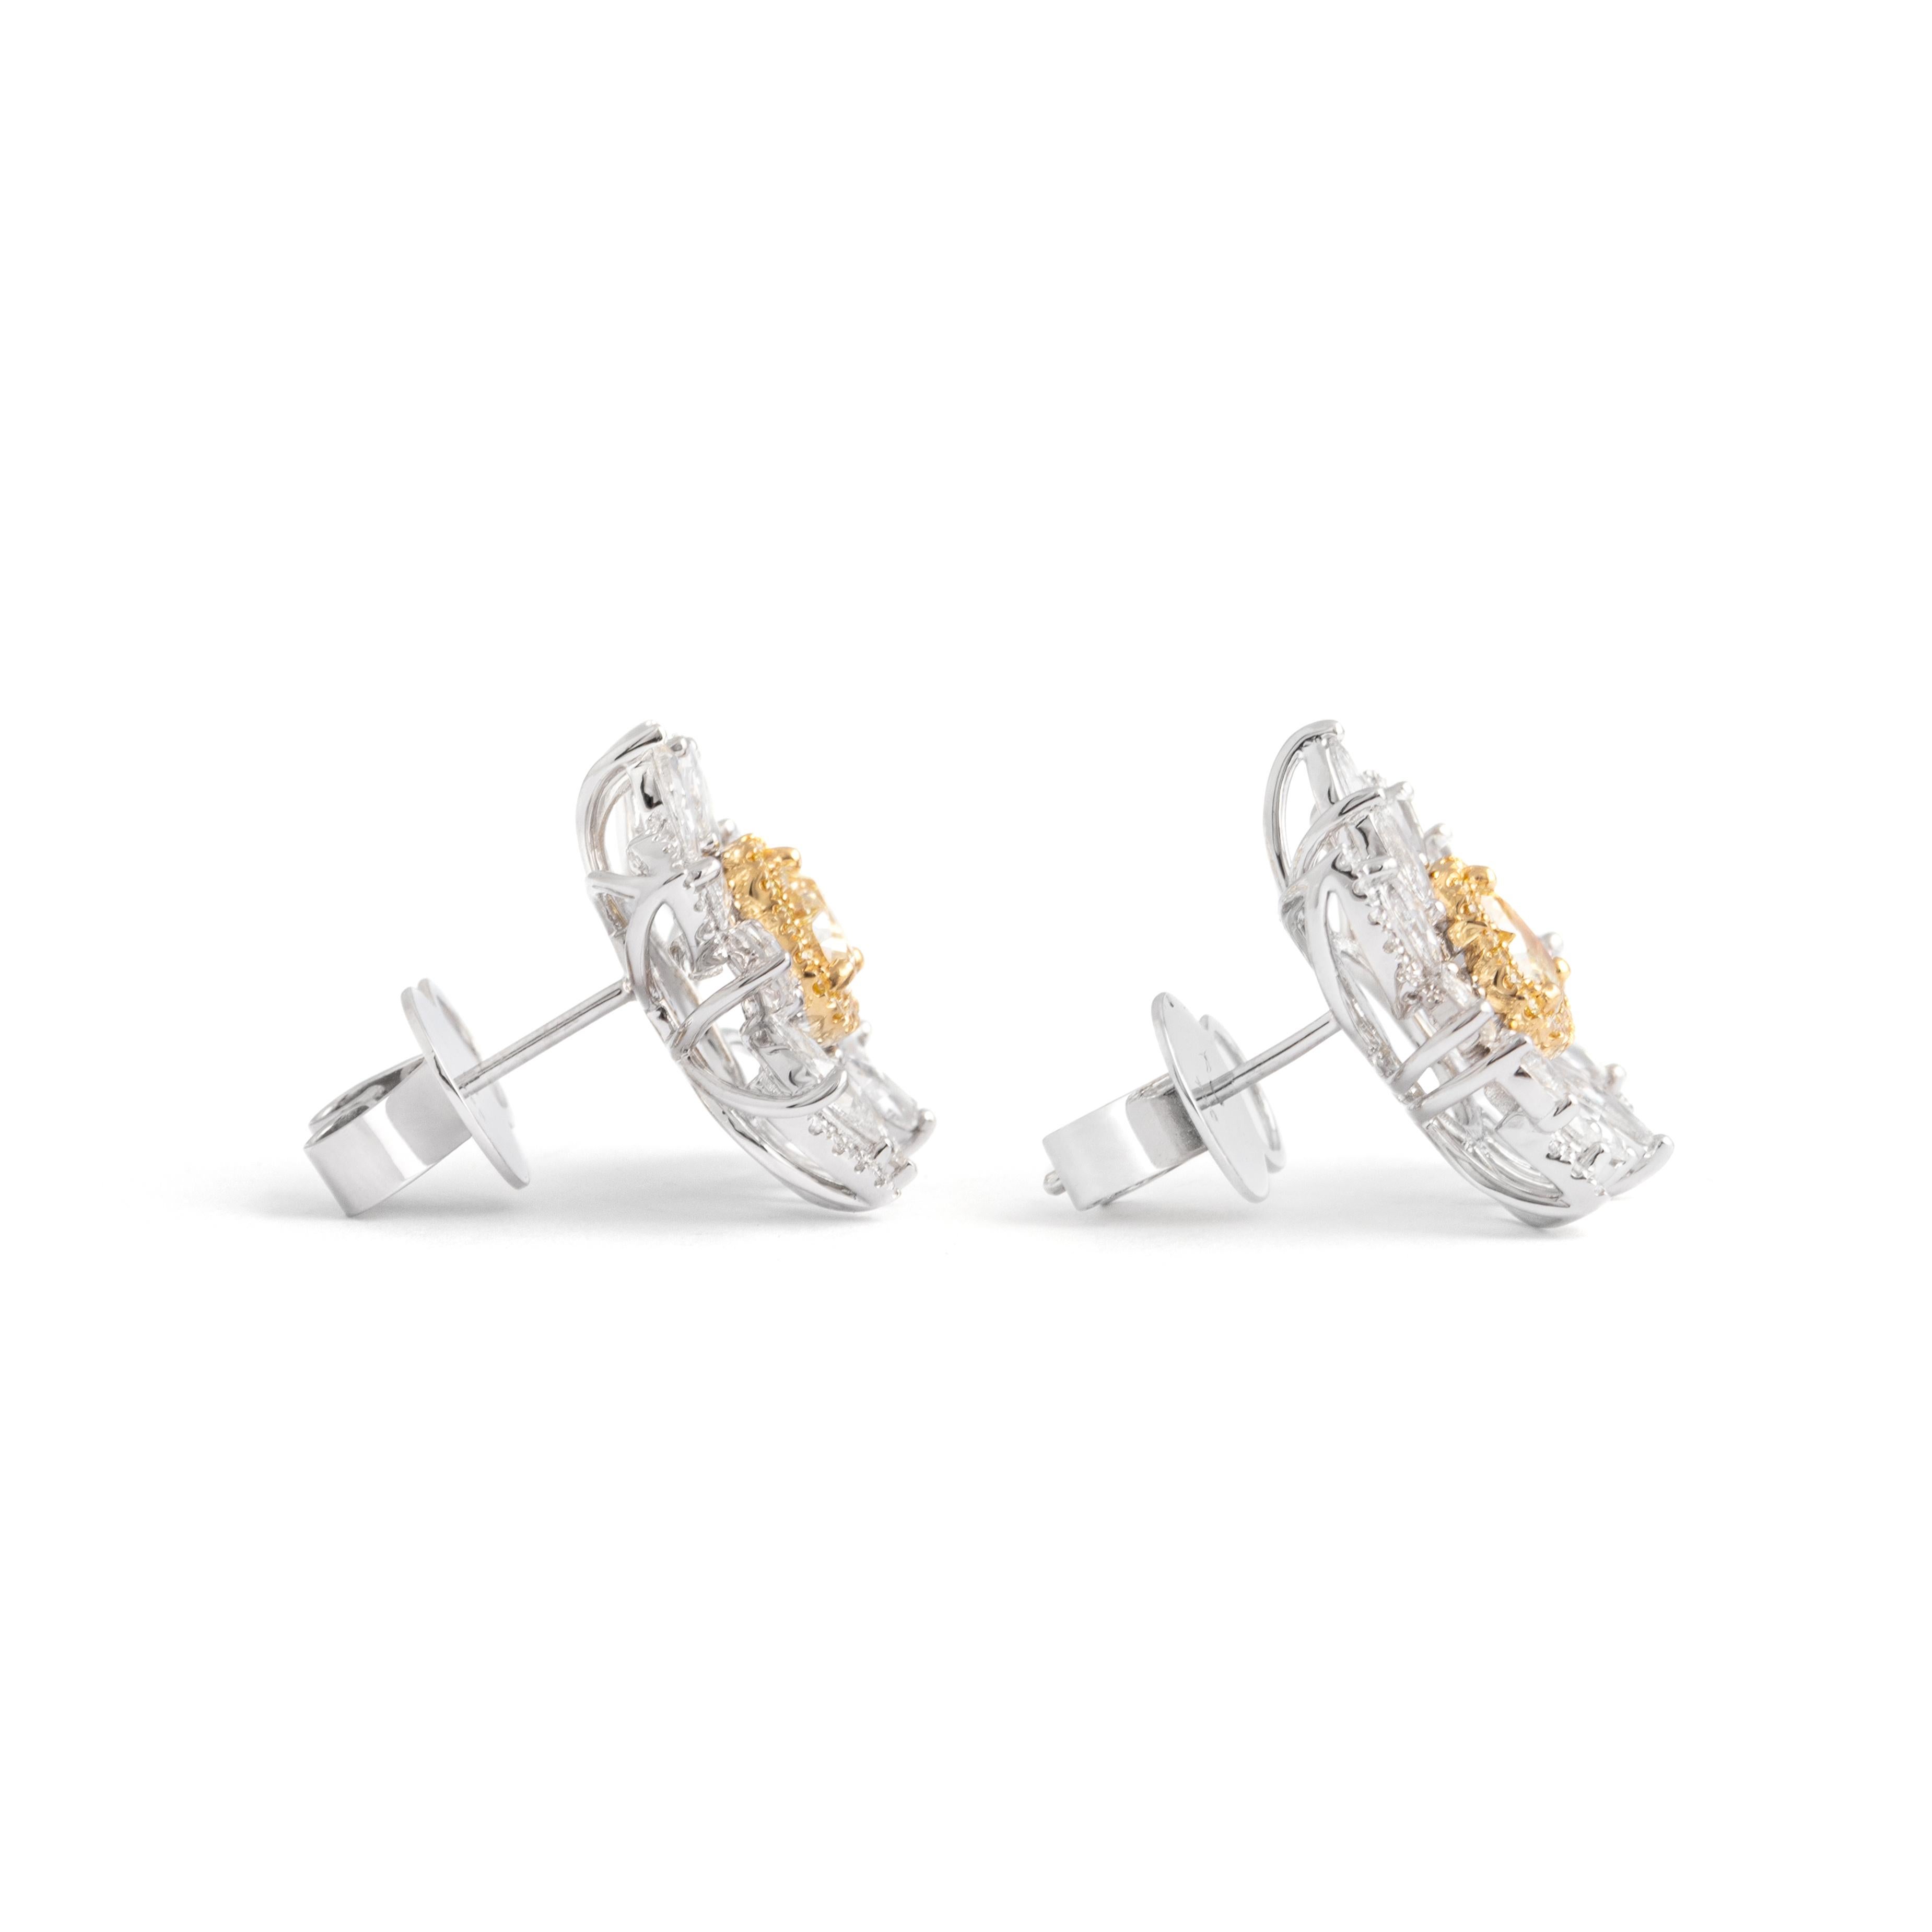 Heart Shape Yellow Diamond surrounded by white Diamonds Clip Earrings in white gold 18K.
White Diamonds are mostly Rose cuts and Round cuts.
Diamond weighing 3.72 carats total.
Total gross weight: 10.06 grams.
Total height: 2.20 centimeters.